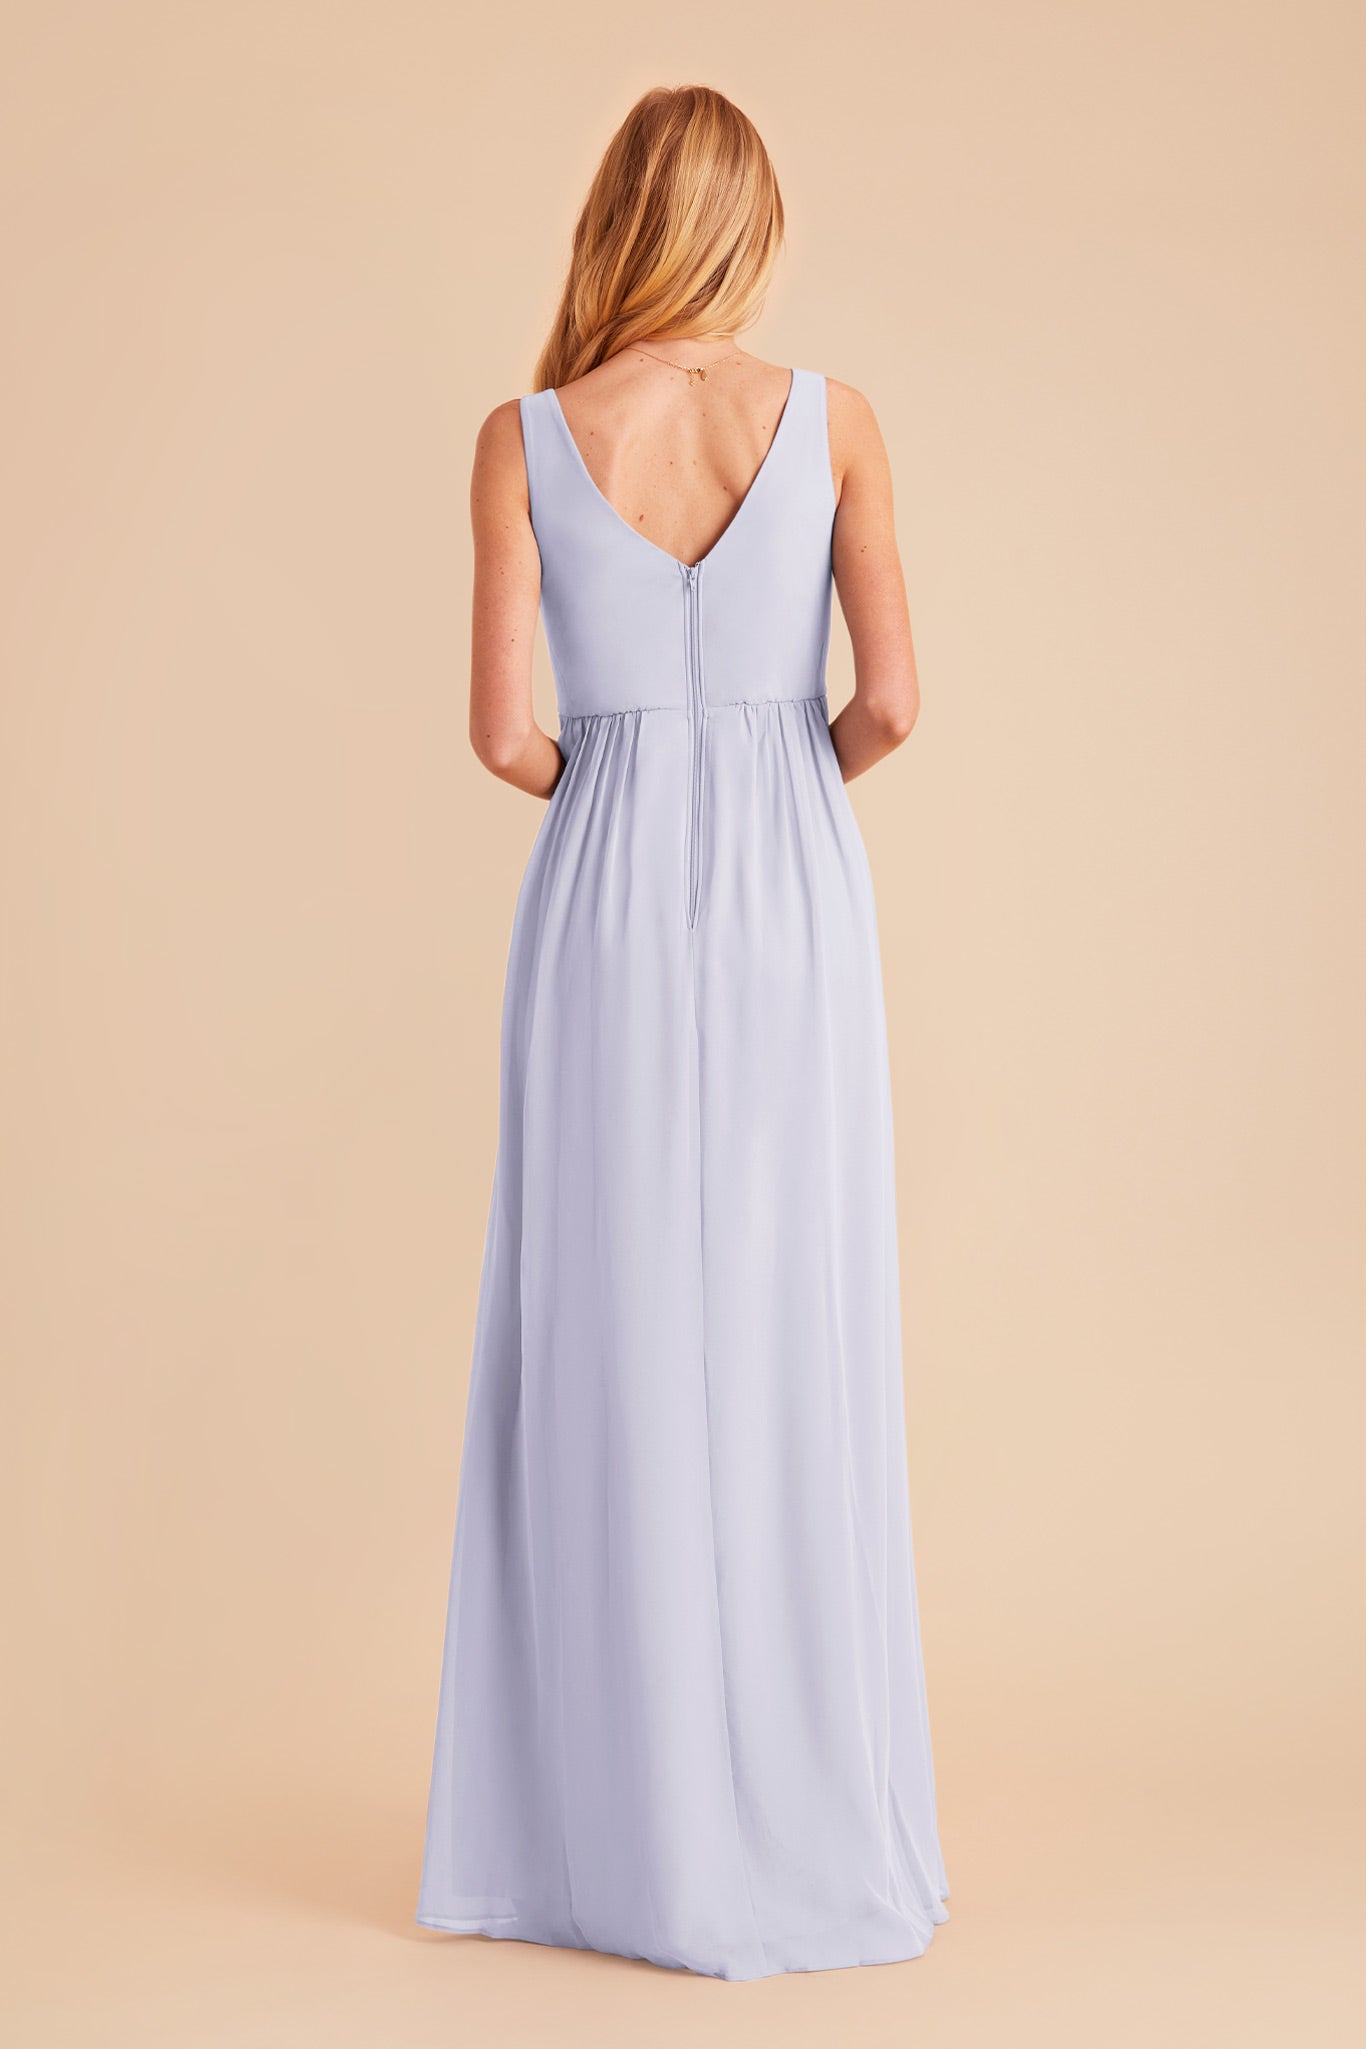 Laurie Periwinkle Blue Empire Bridesmaid Dress | Birdy Grey